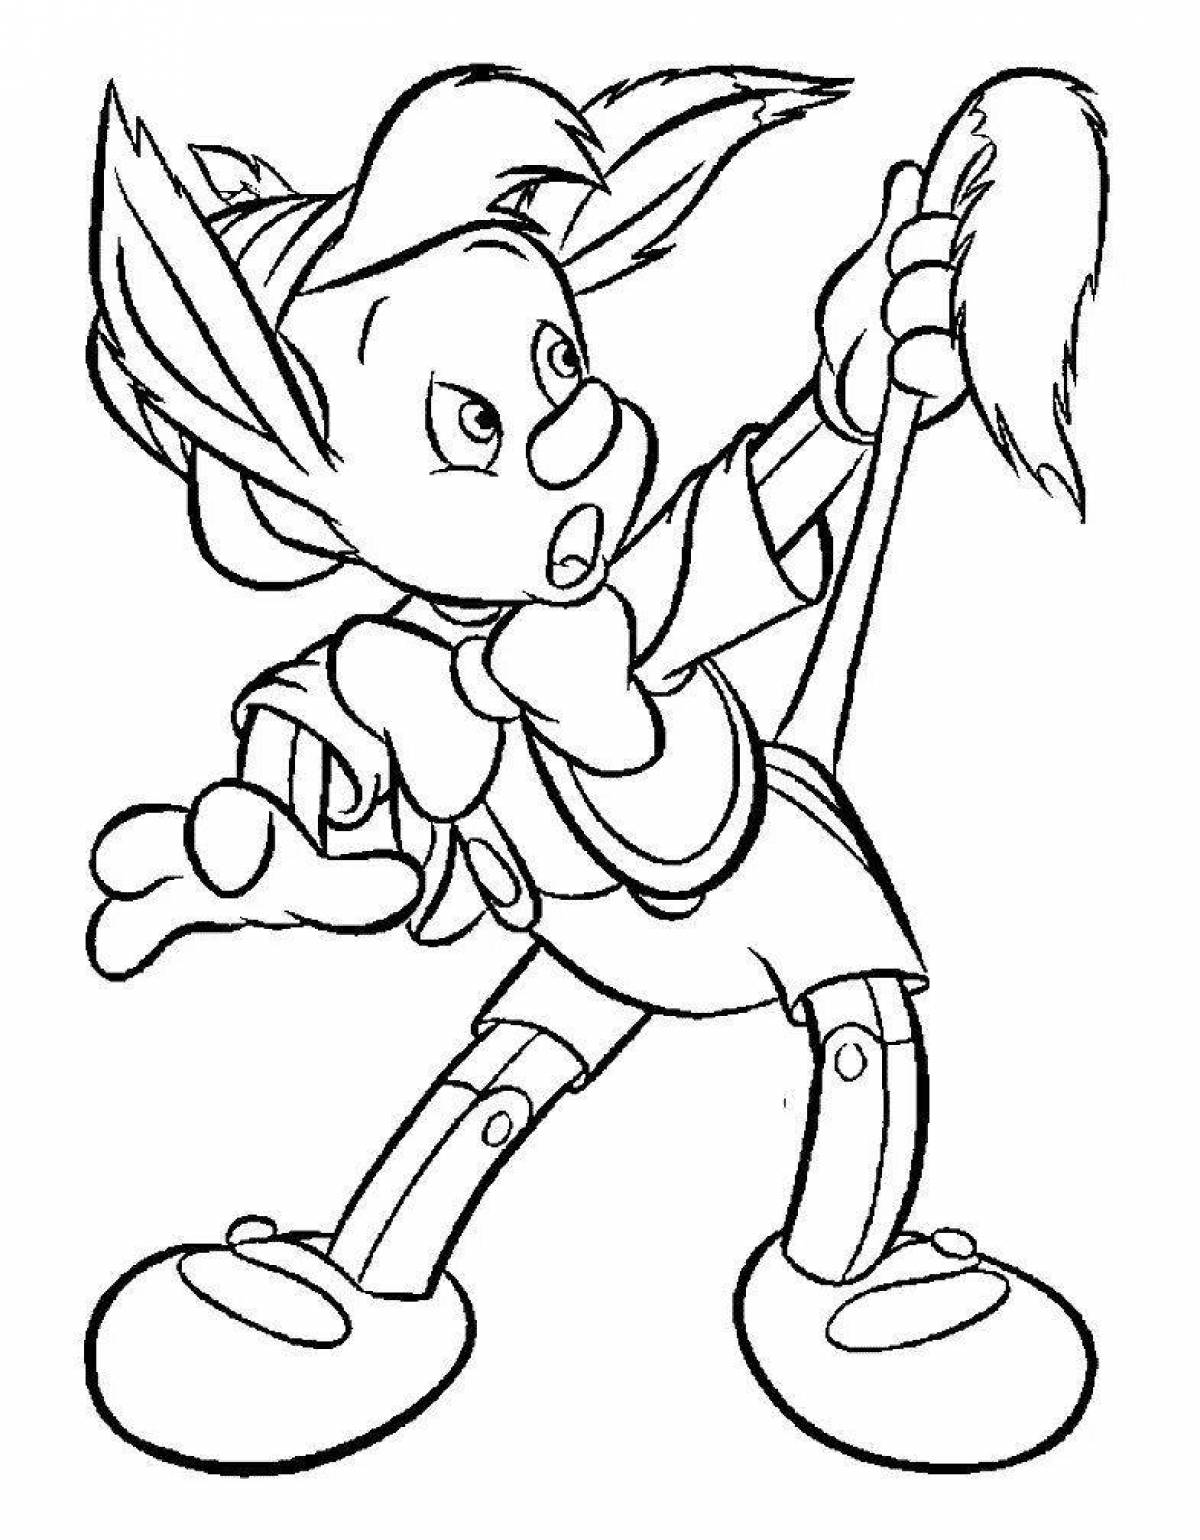 Pinocchio crazy coloring book for kids